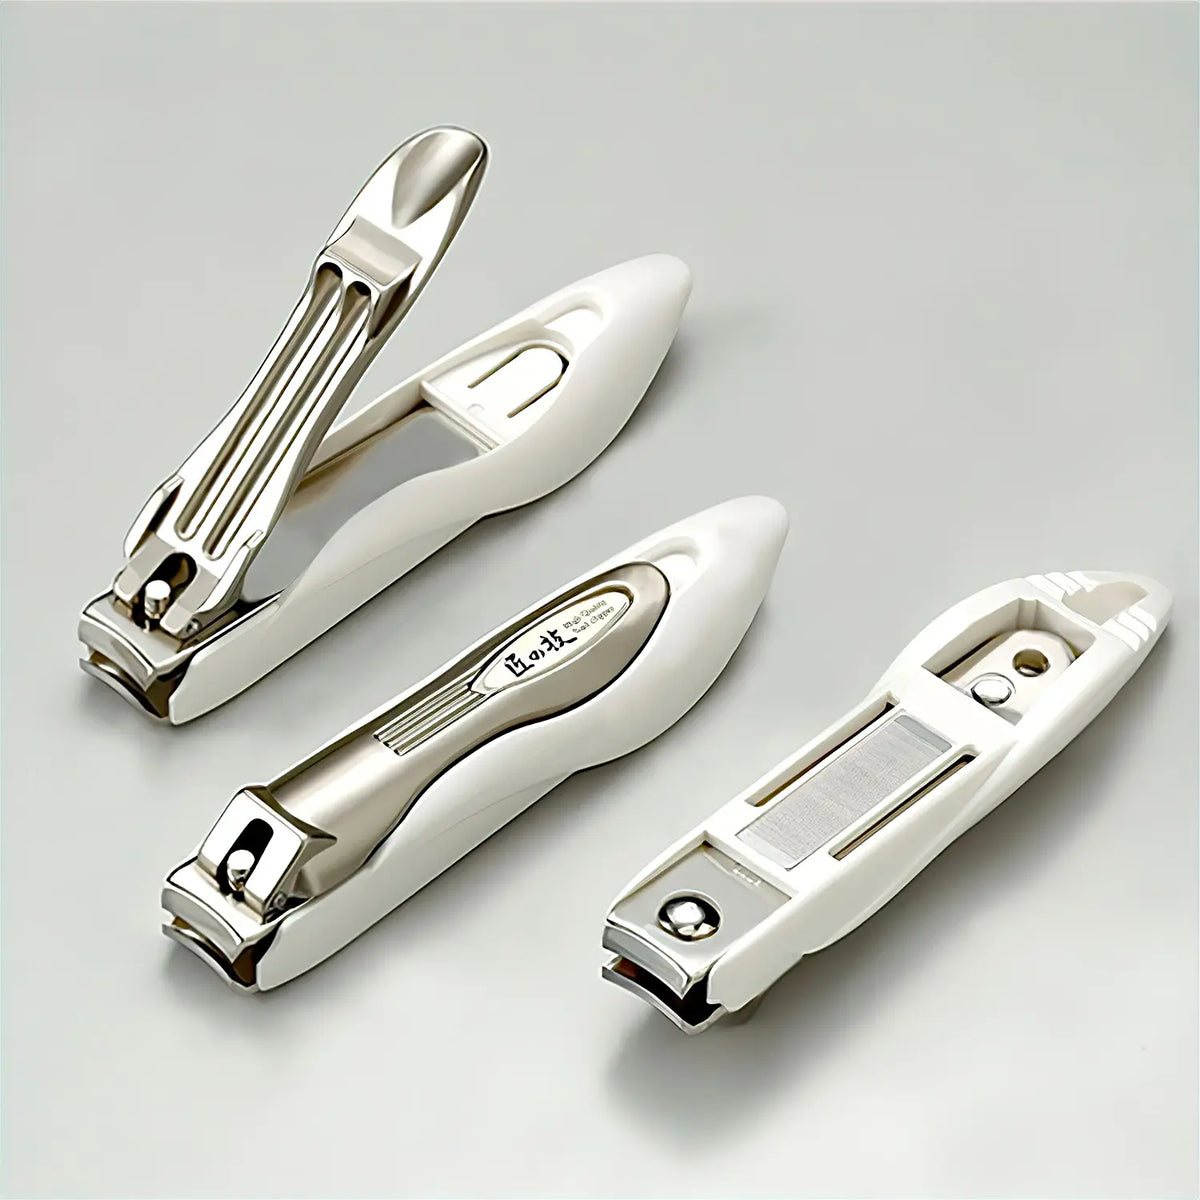 Green Bell G-1305 Nail Clippers Stainless Steel High Quality Japan  Takuminowaza | eBay